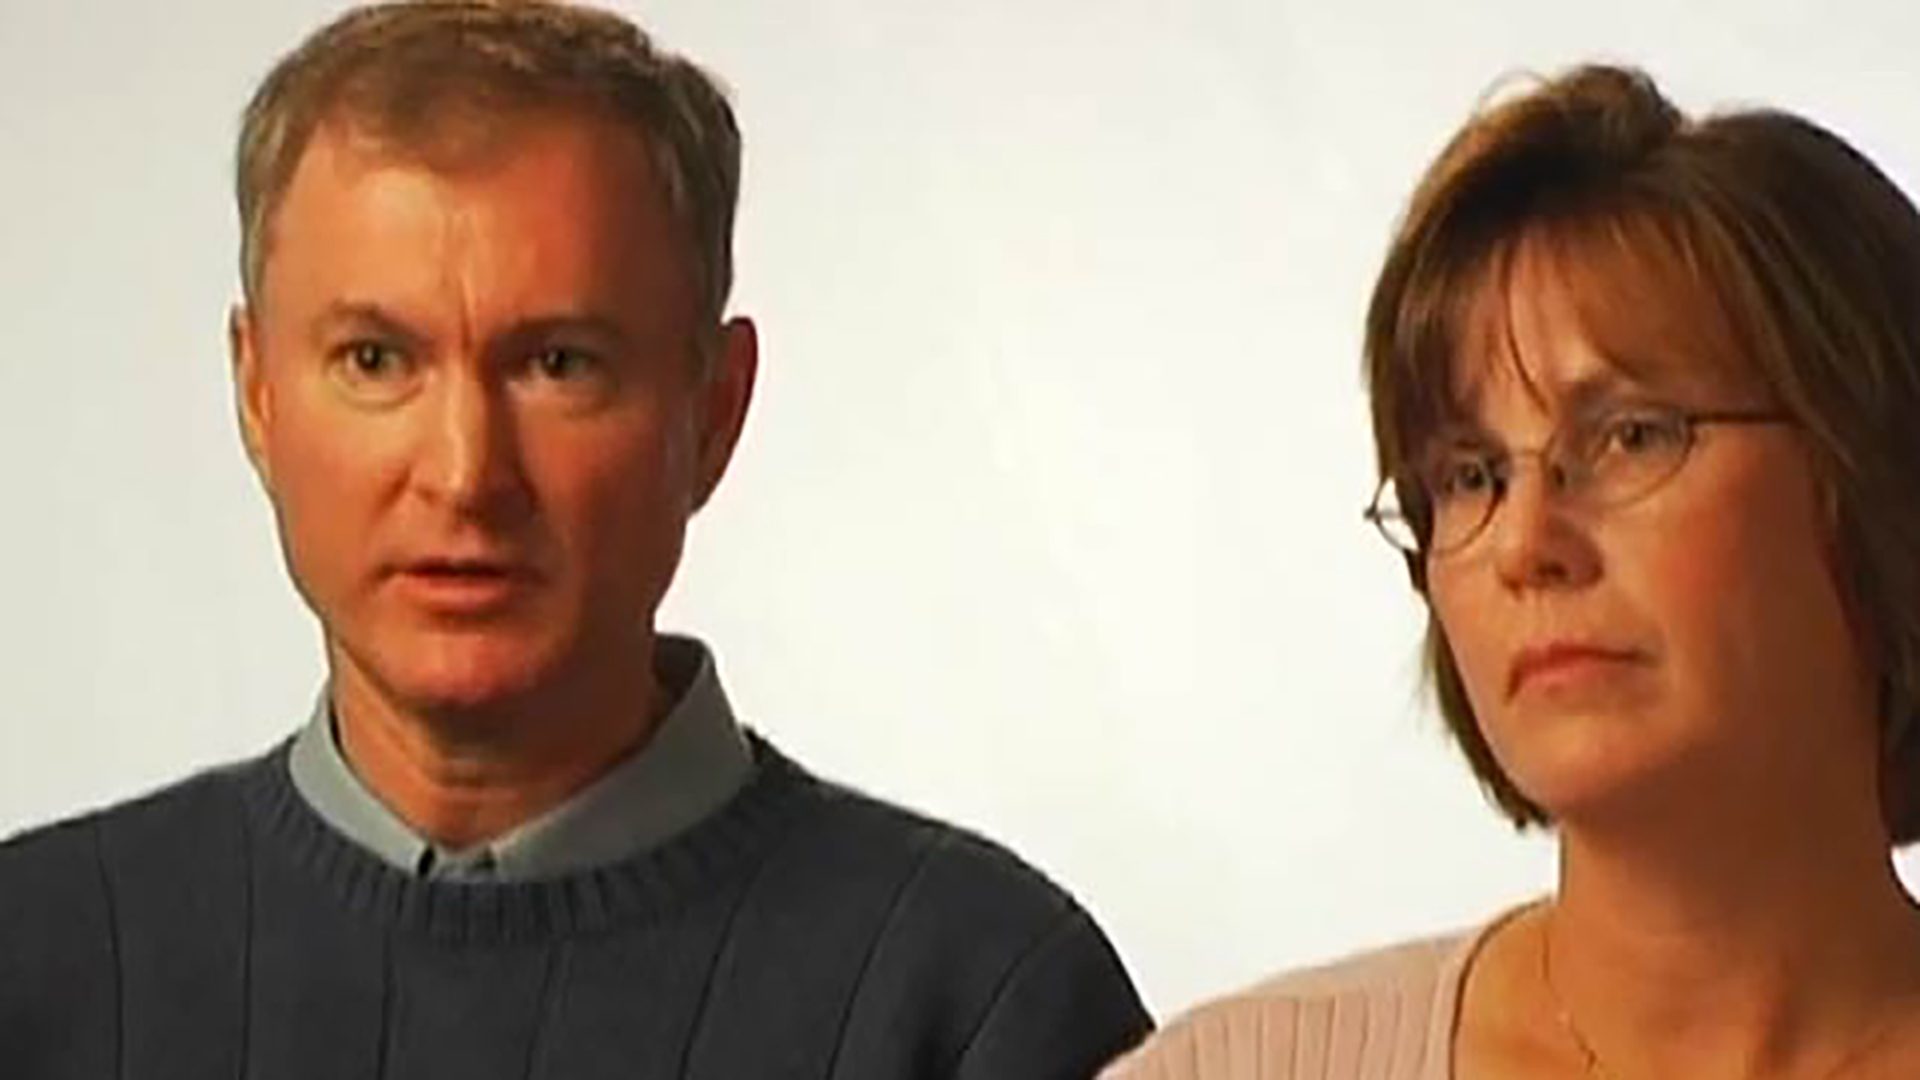 A caucasian man and woman being interviewed against a white background